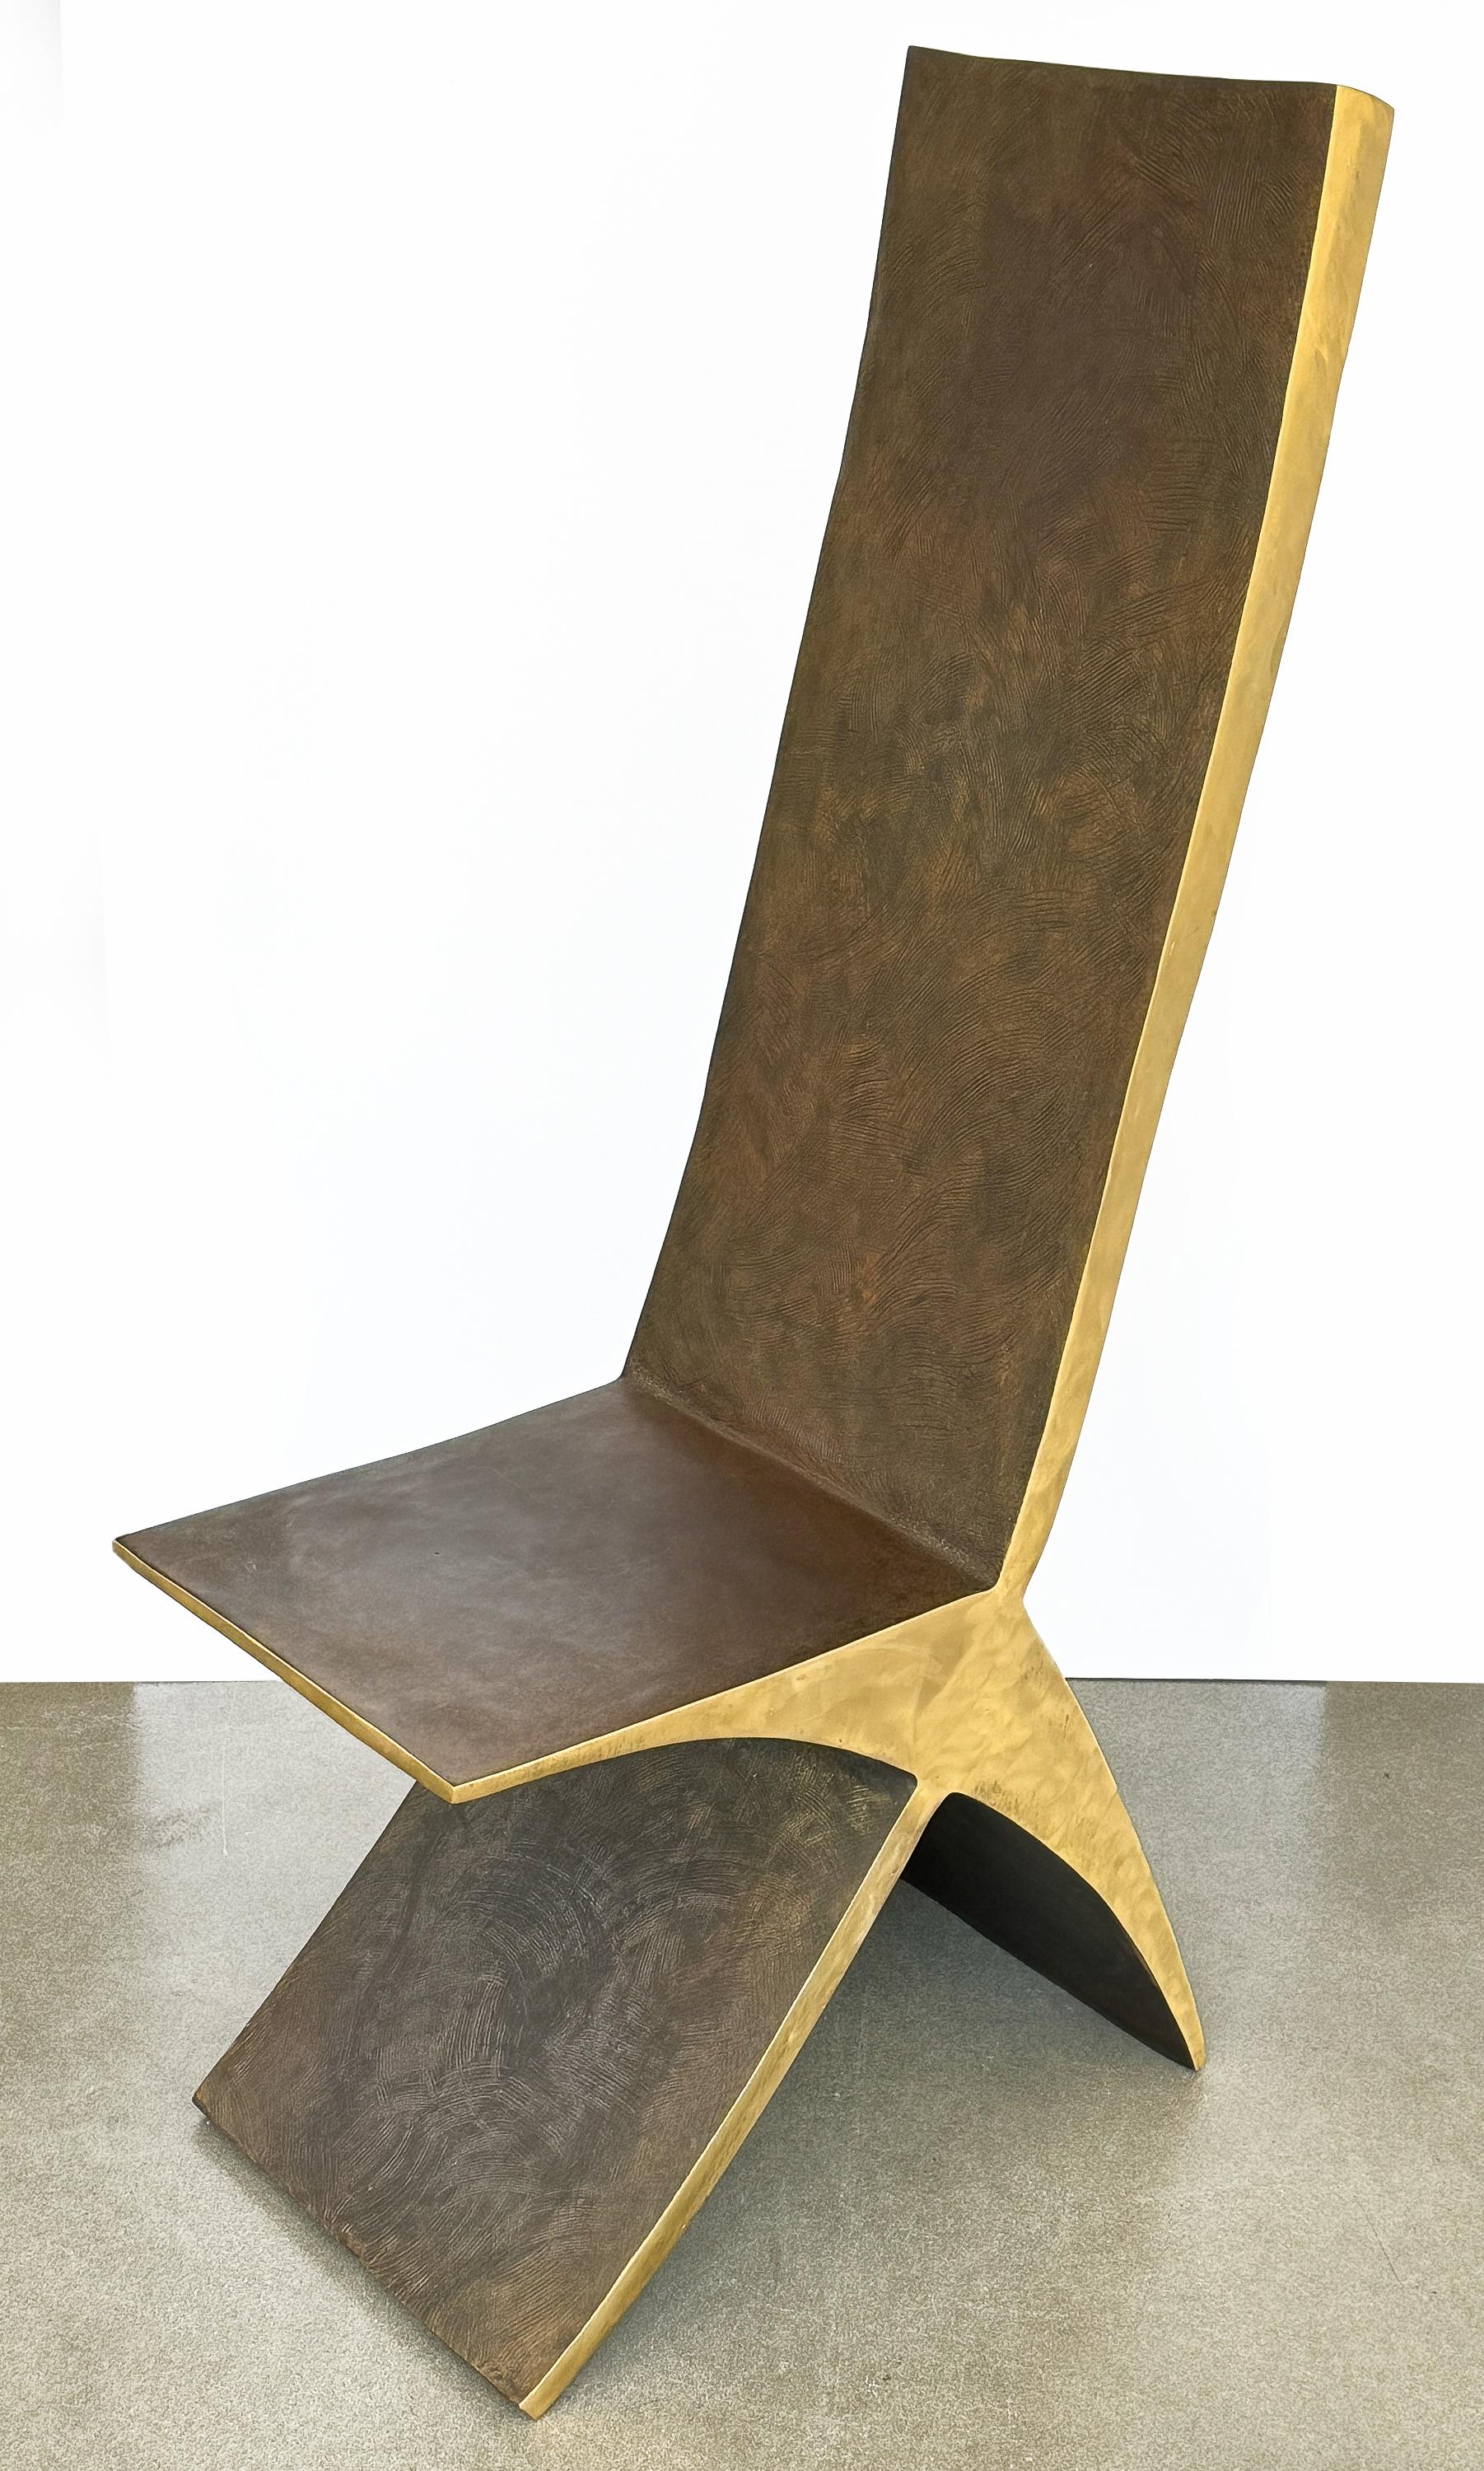 This sculptural bronze chair by American artist James Vilona (b. 1955), exemplifies modern minimalist artistry through its use of patinated bronze and simple yet striking X-form design. This chair isn't just a piece of furniture, but a work of art